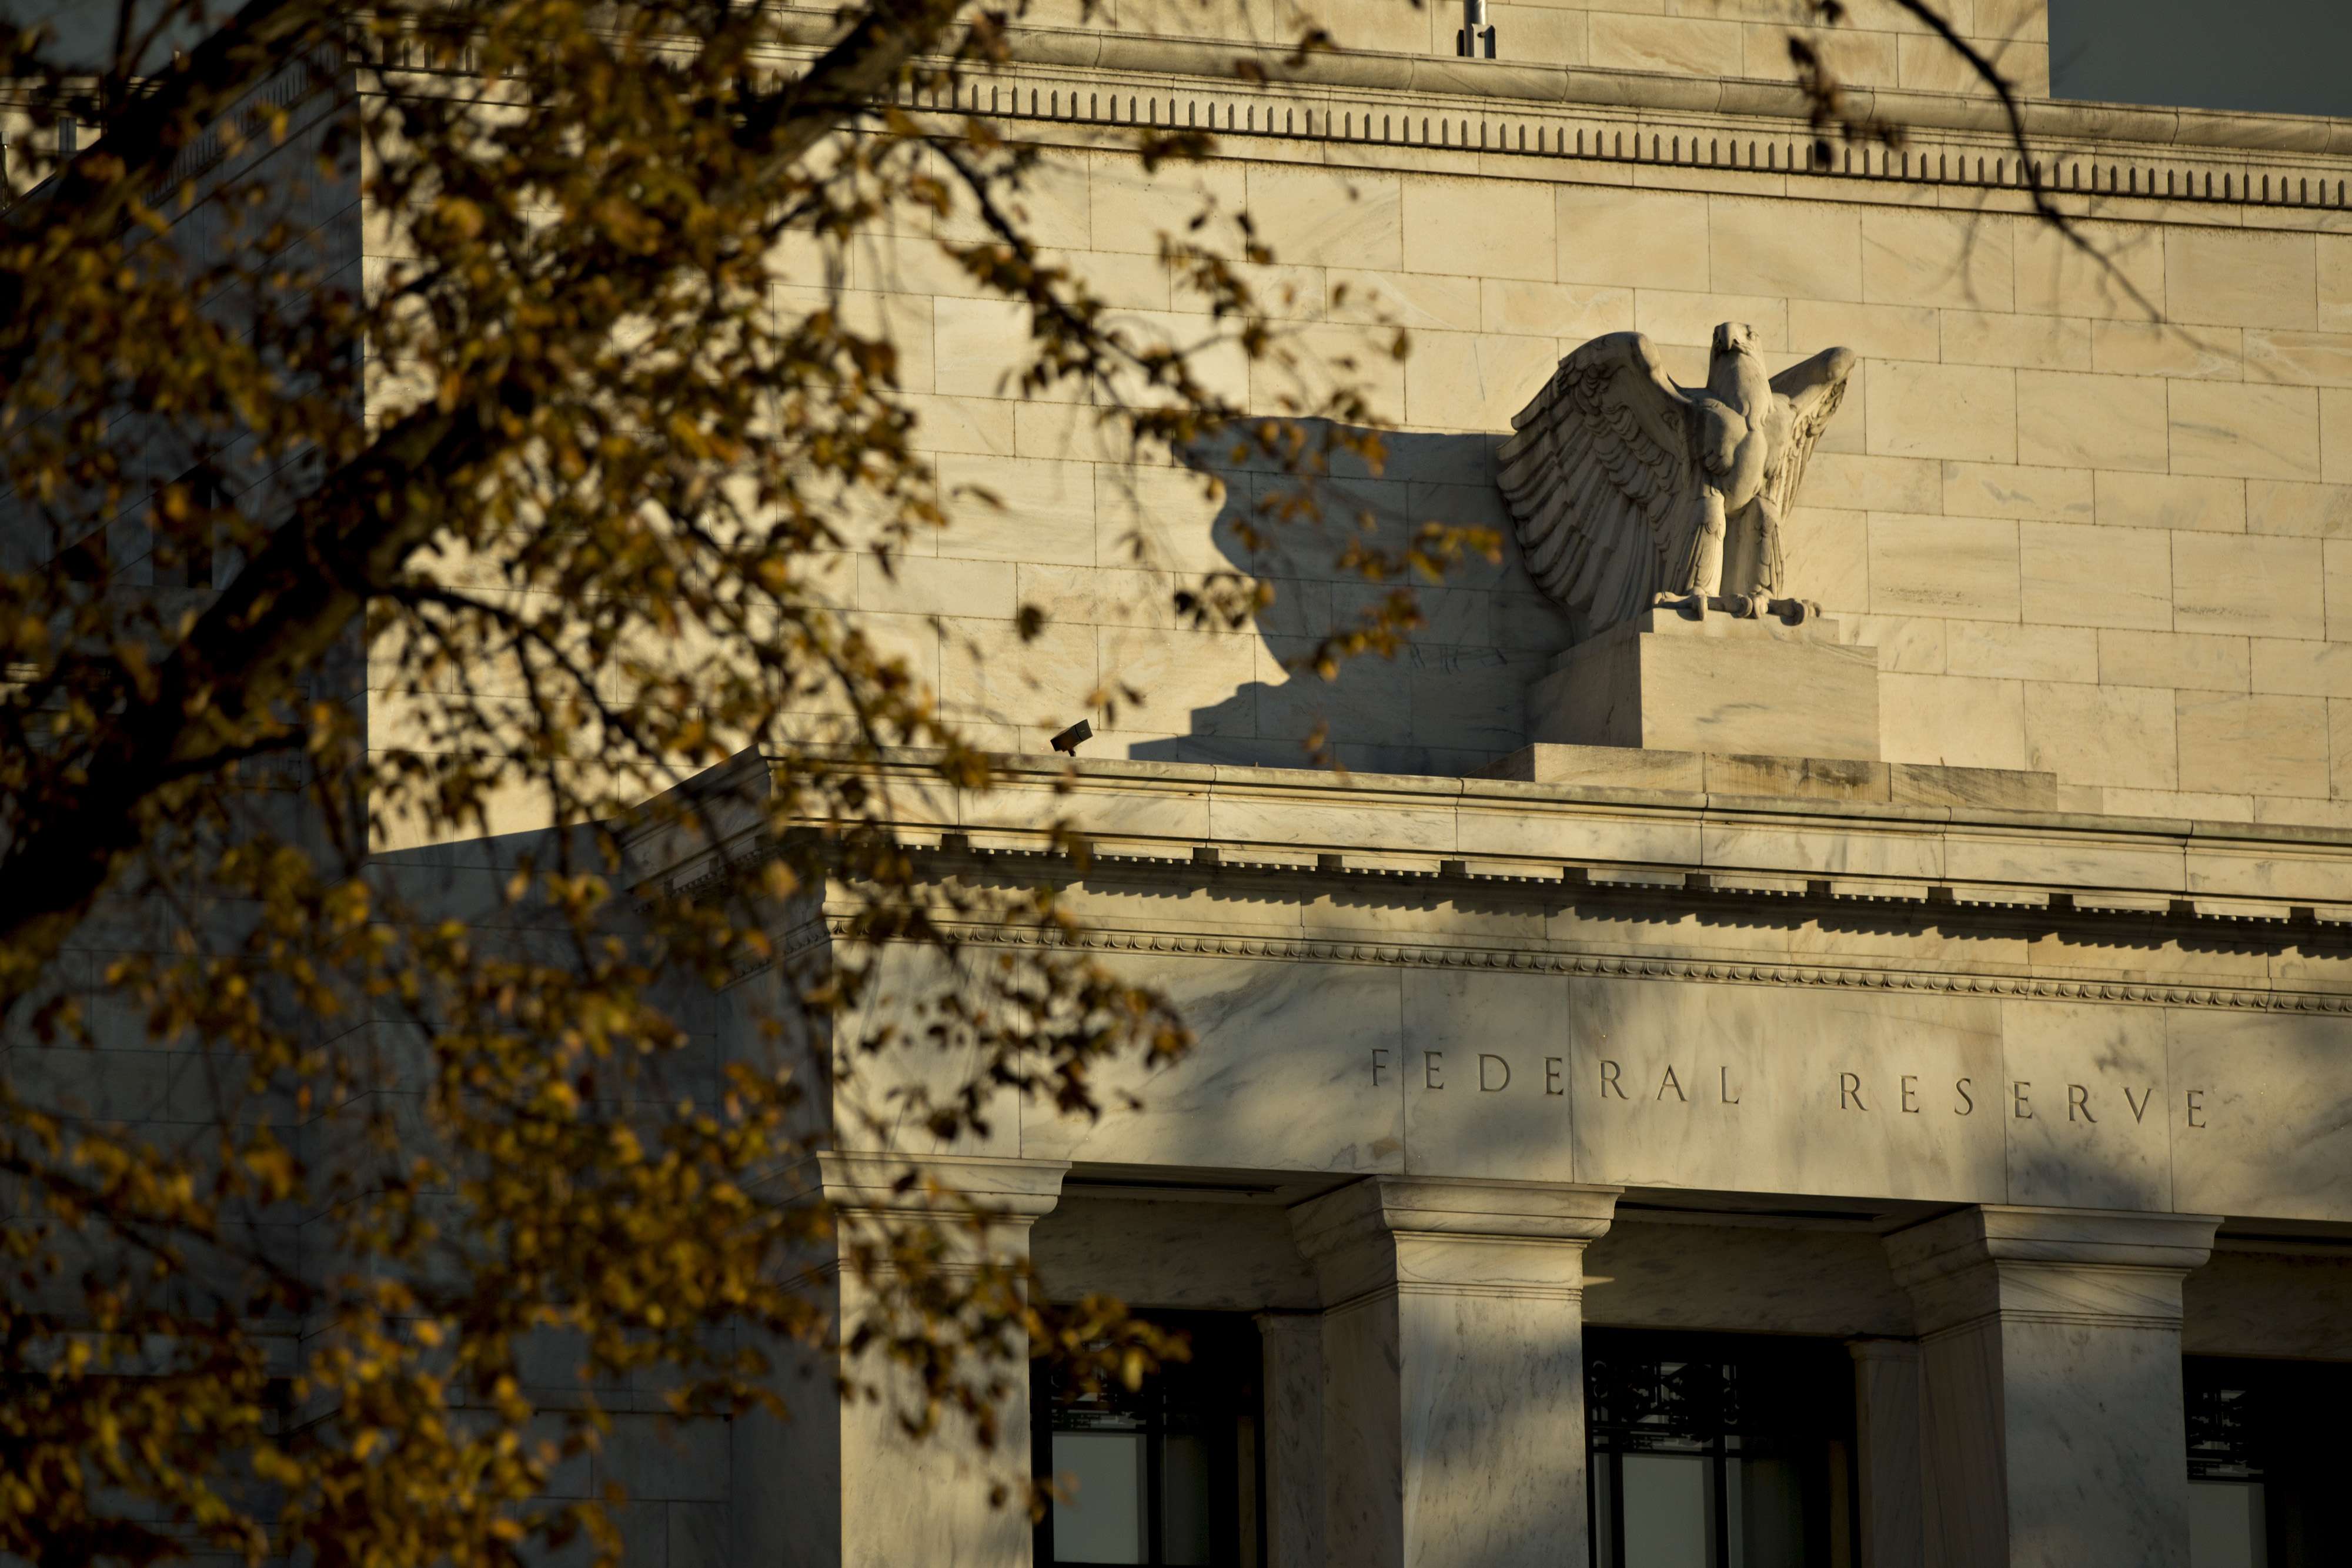 The facade of the Federal Reserve building in Washington, D.C. Photo: Bloomberg